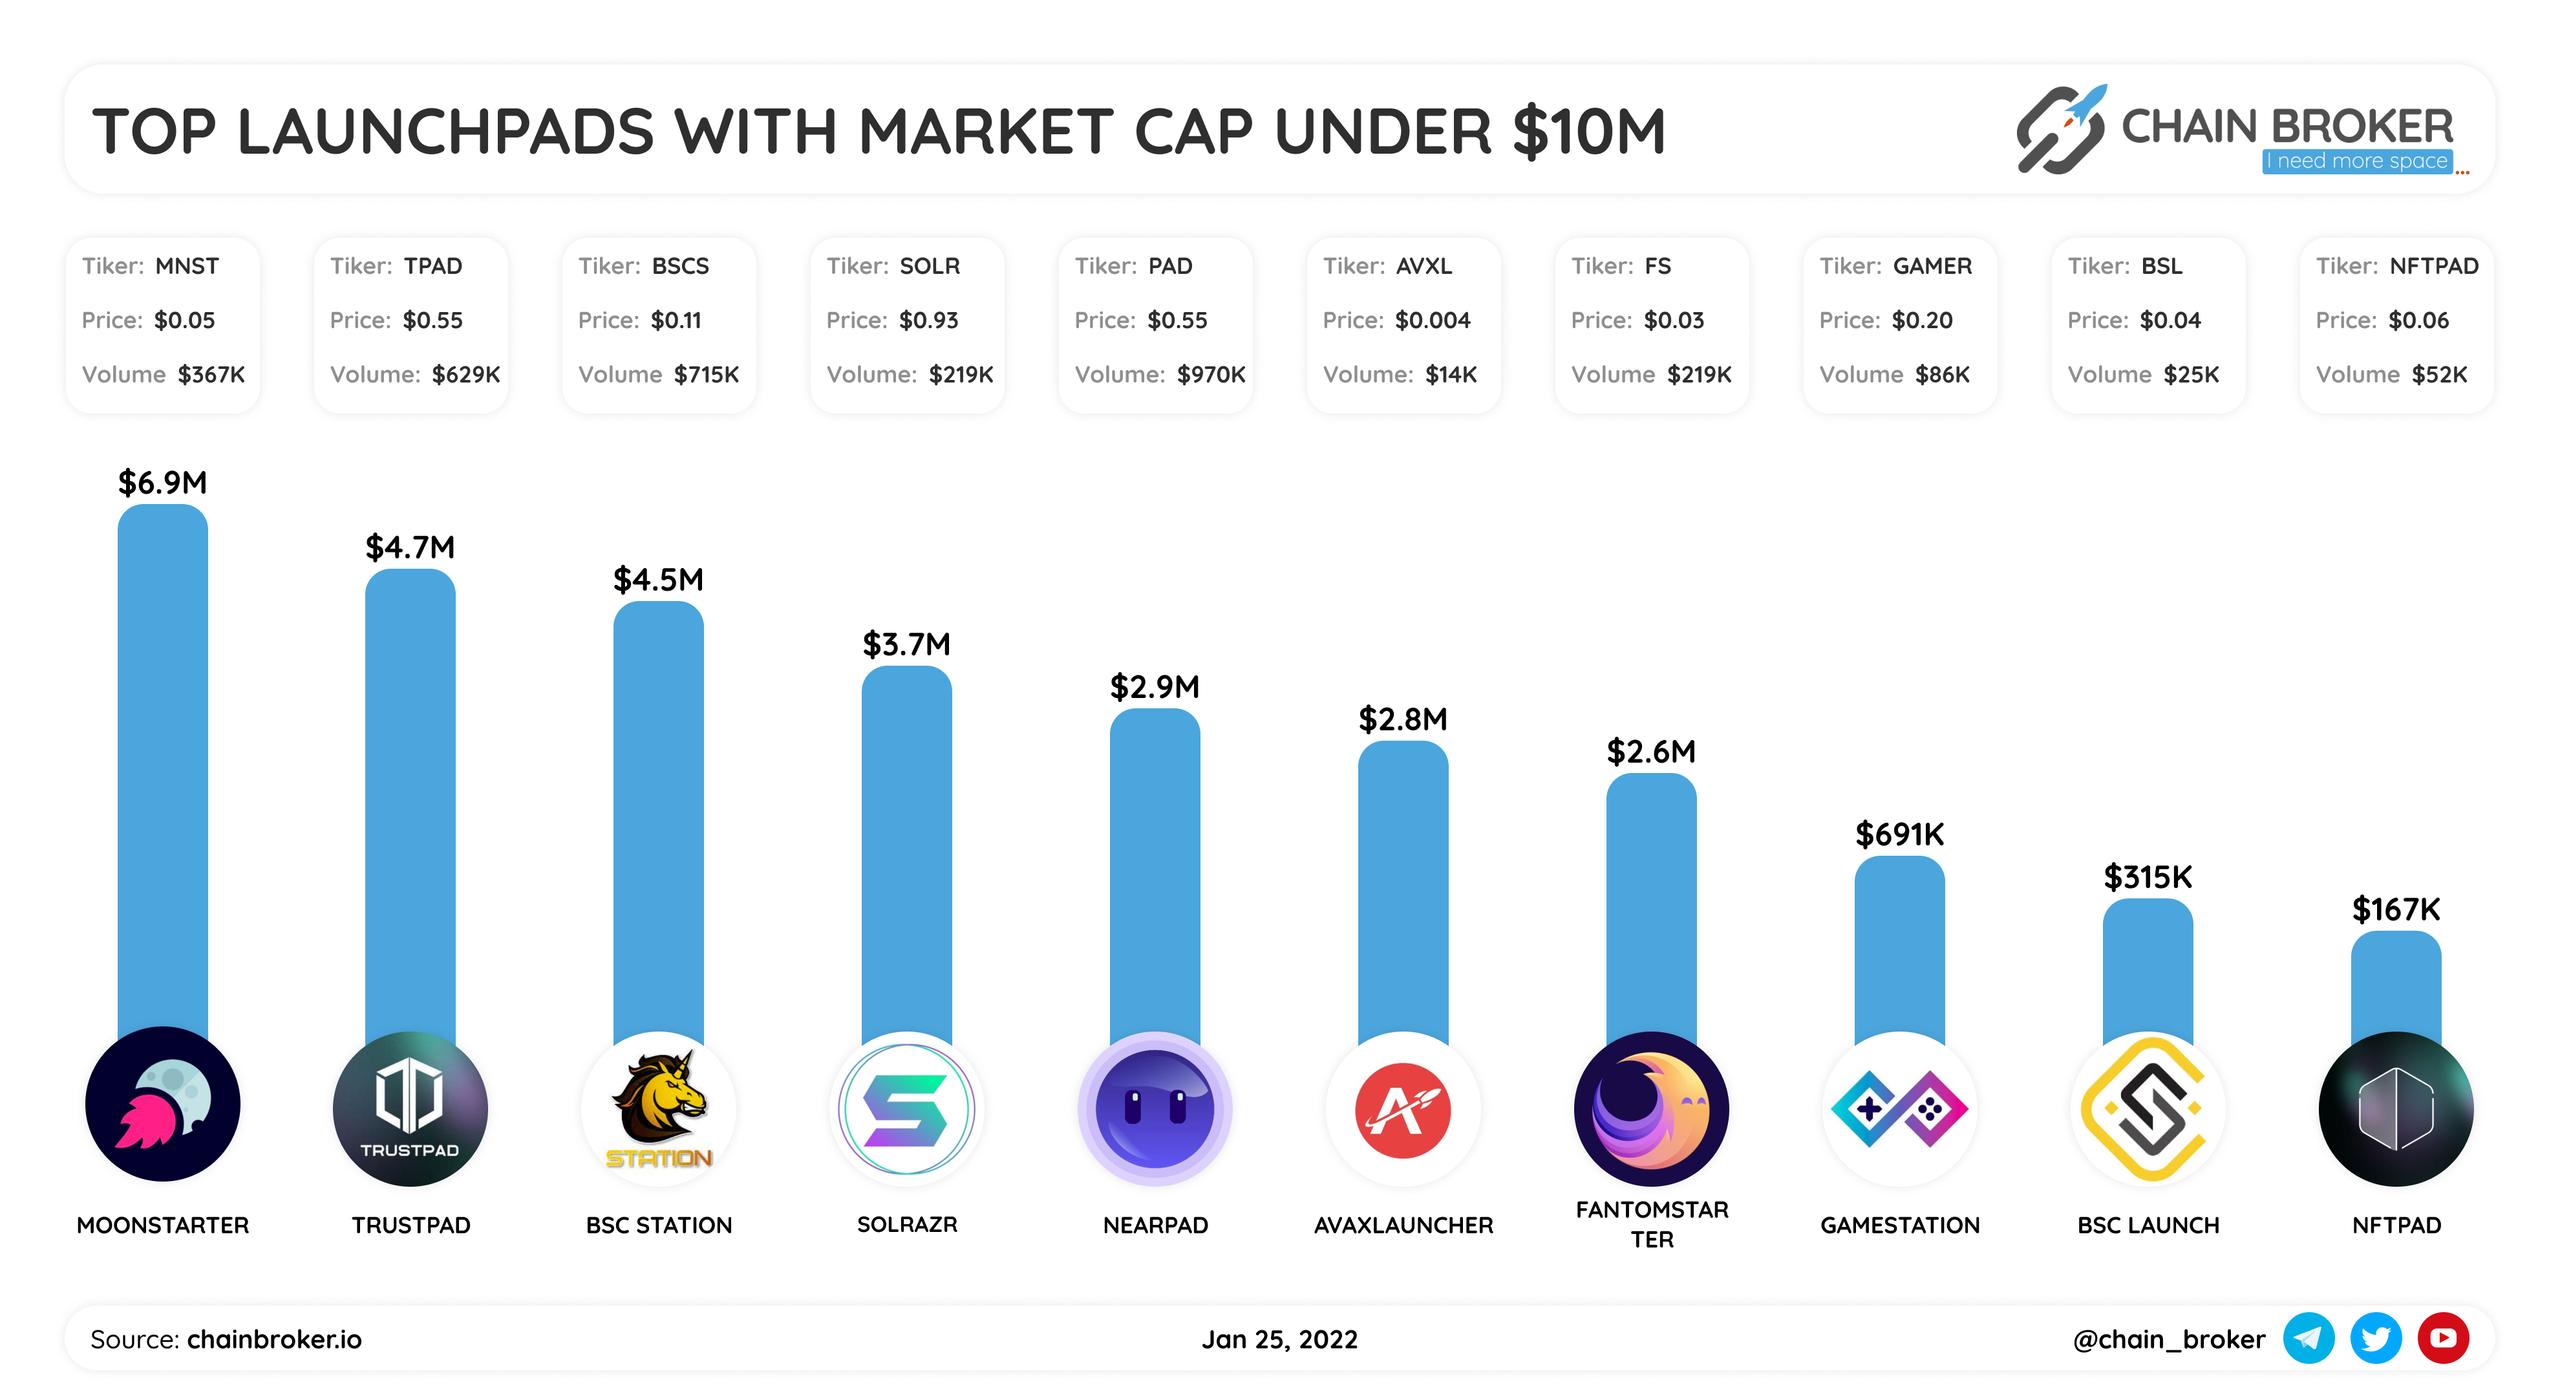 Top Launchpads with market cap under $10M